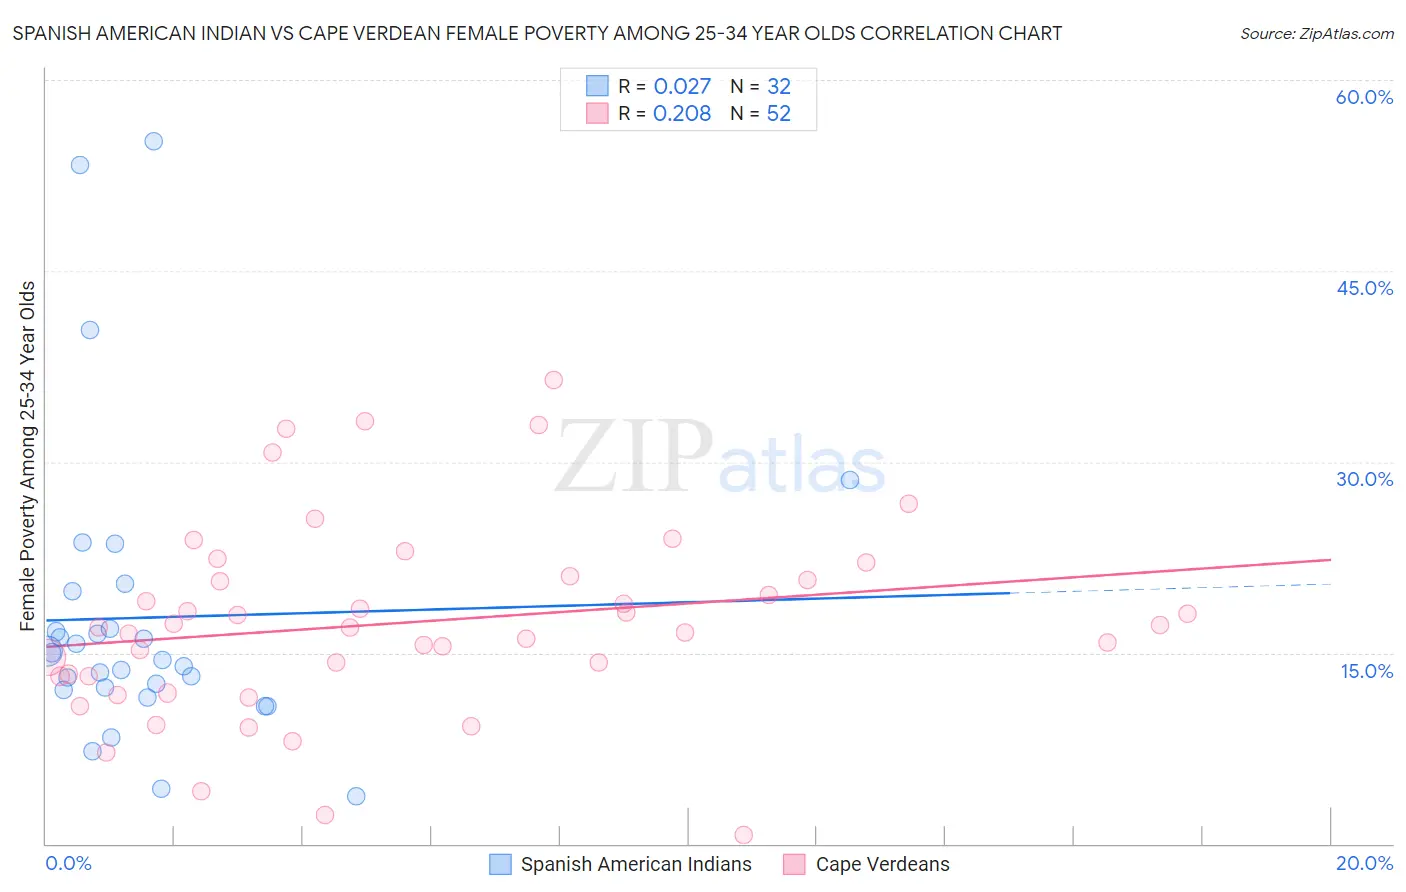 Spanish American Indian vs Cape Verdean Female Poverty Among 25-34 Year Olds